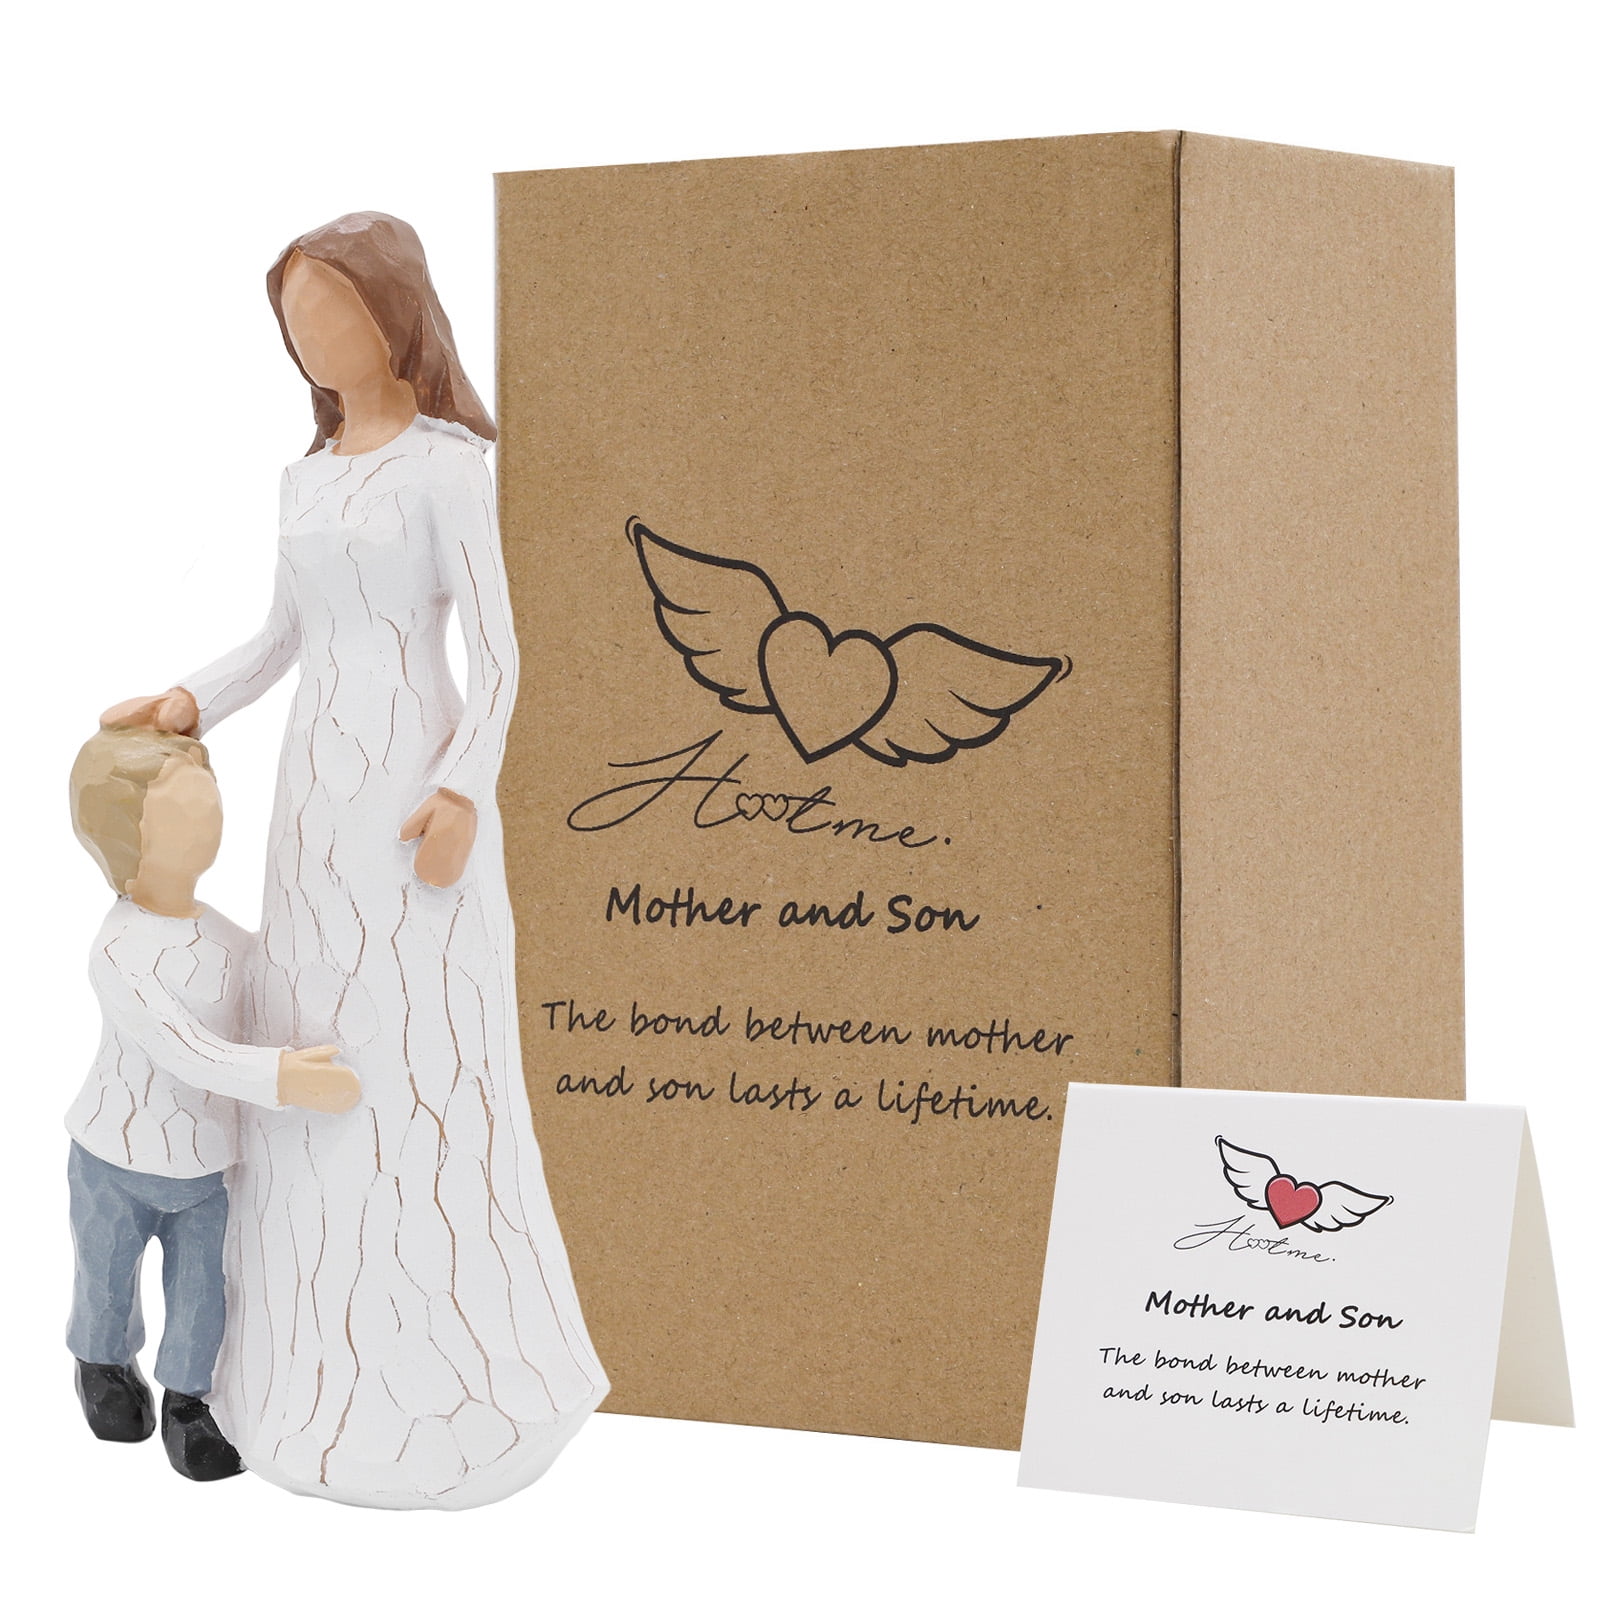 The Greatest Bond Mon and Child Sculptures Sculpted Hand-Painted Figures with Gift Card for Anniversary Birthday Mother and Son Figurines Statues Multicolor